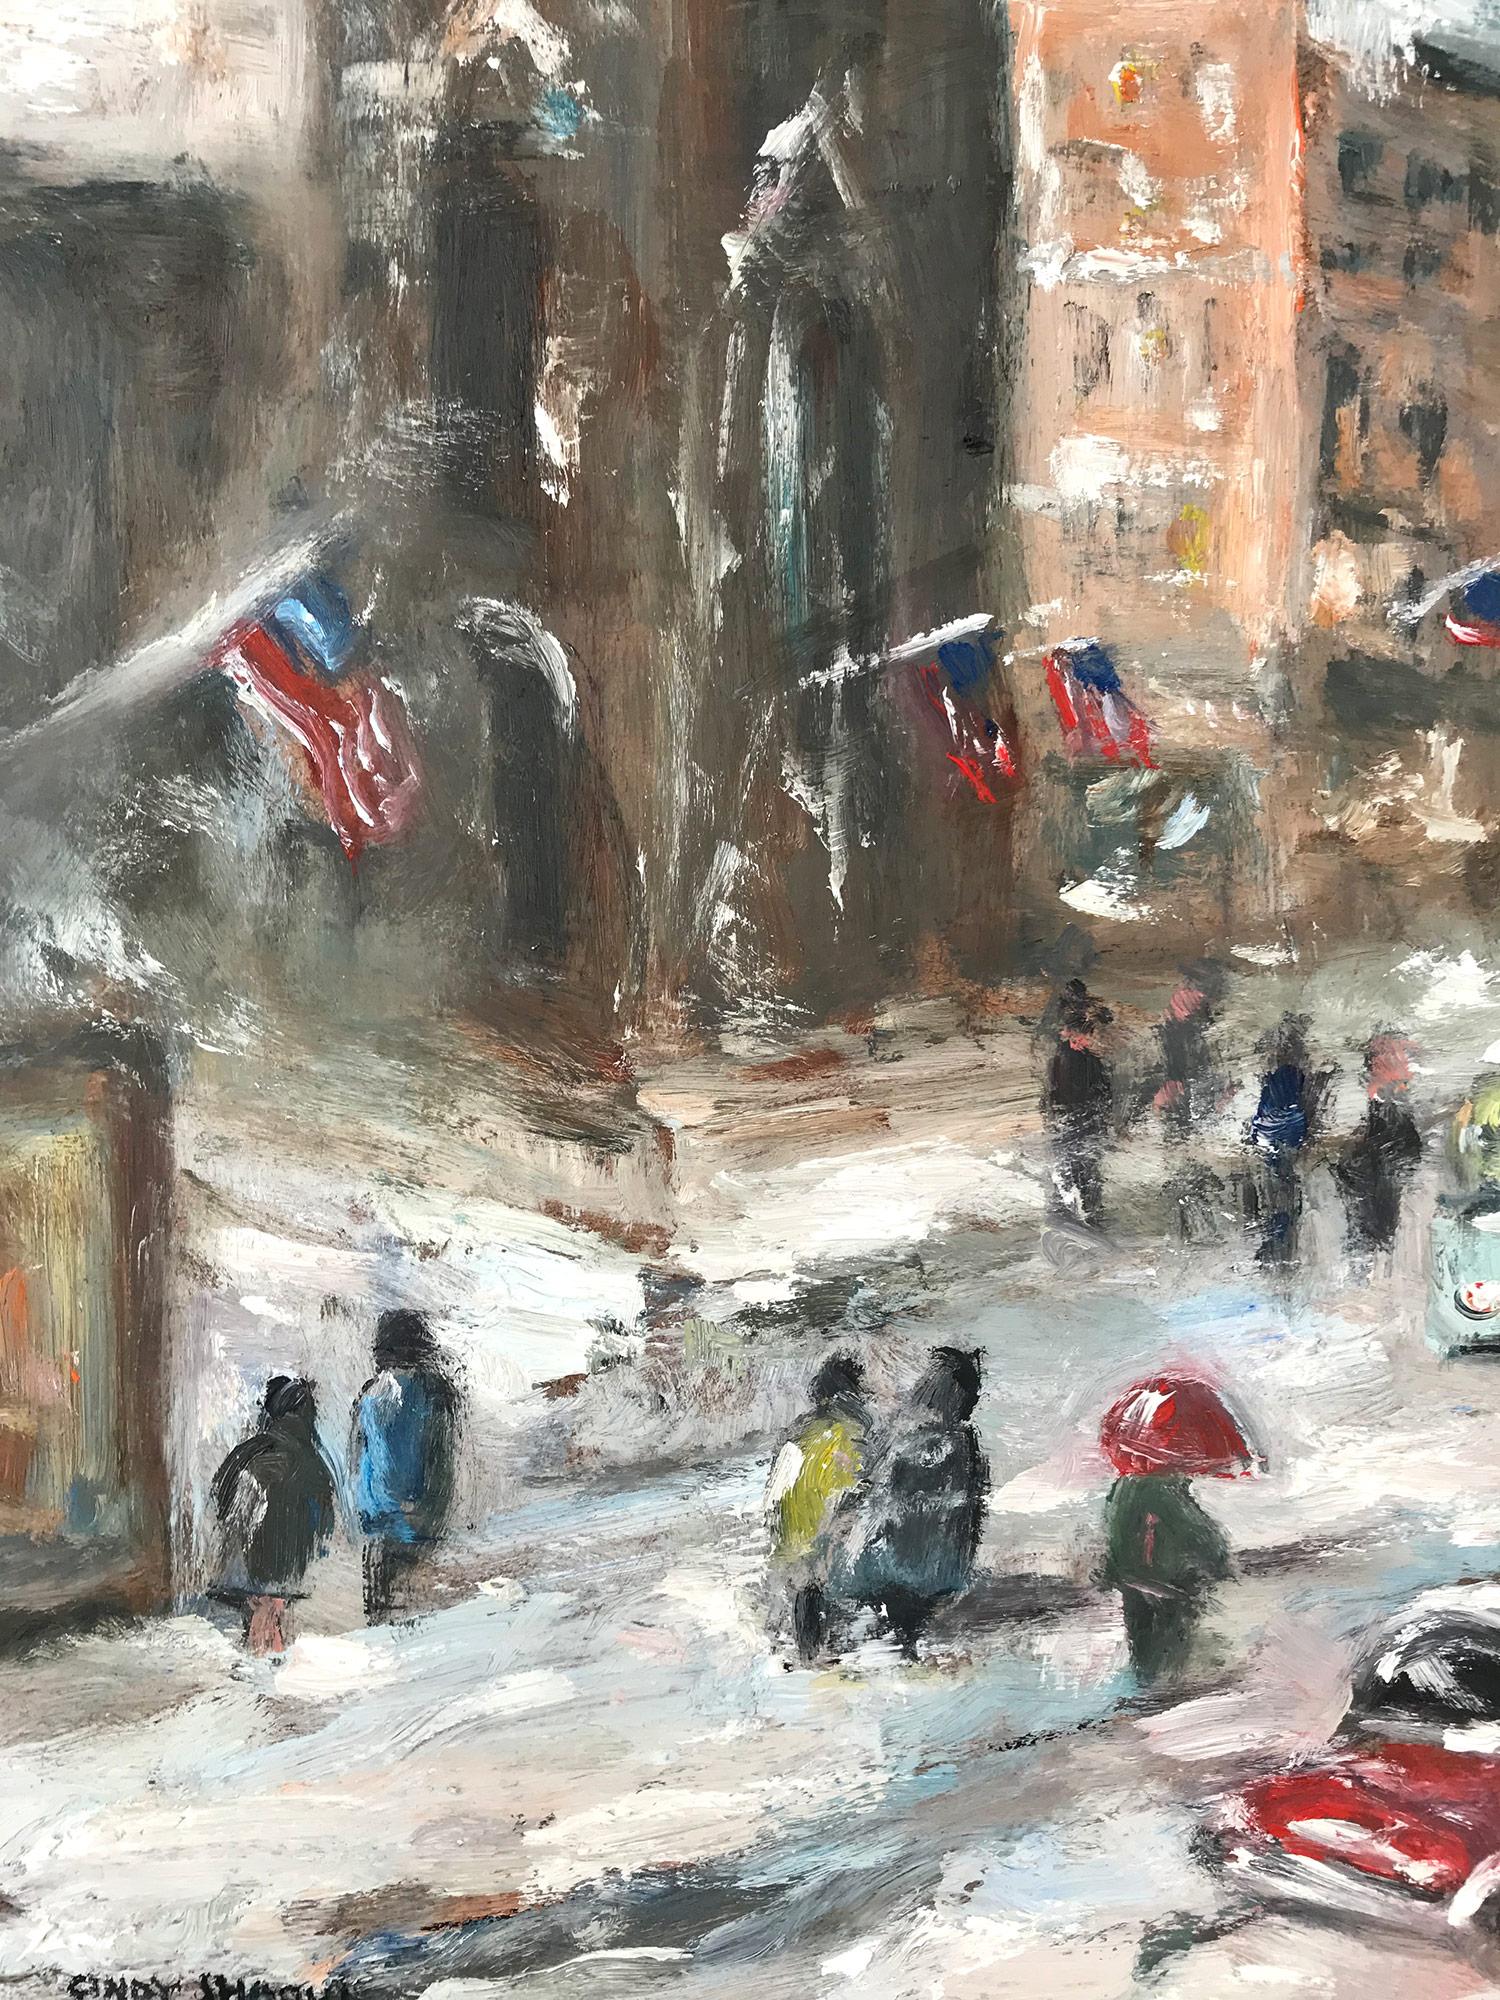 Snow in Downtown Wall Street, Impressionist Street Scene in style of Guy Wiggins - Gray Figurative Painting by Cindy Shaoul